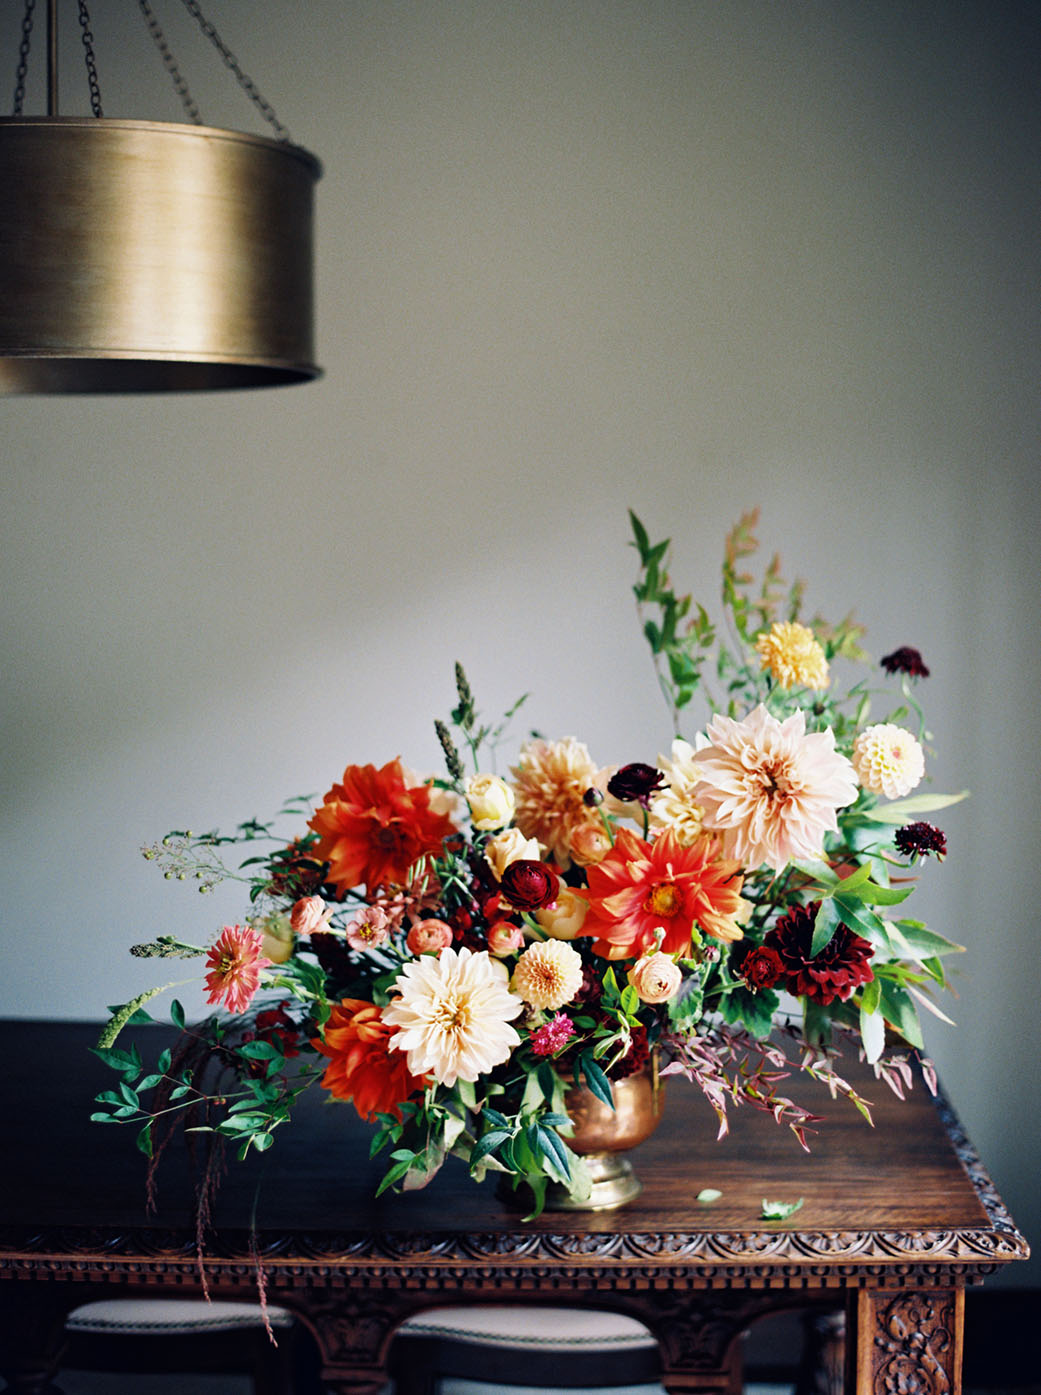 floral arrangement on an antique carved wood table beneath a cyndrical brass lamp